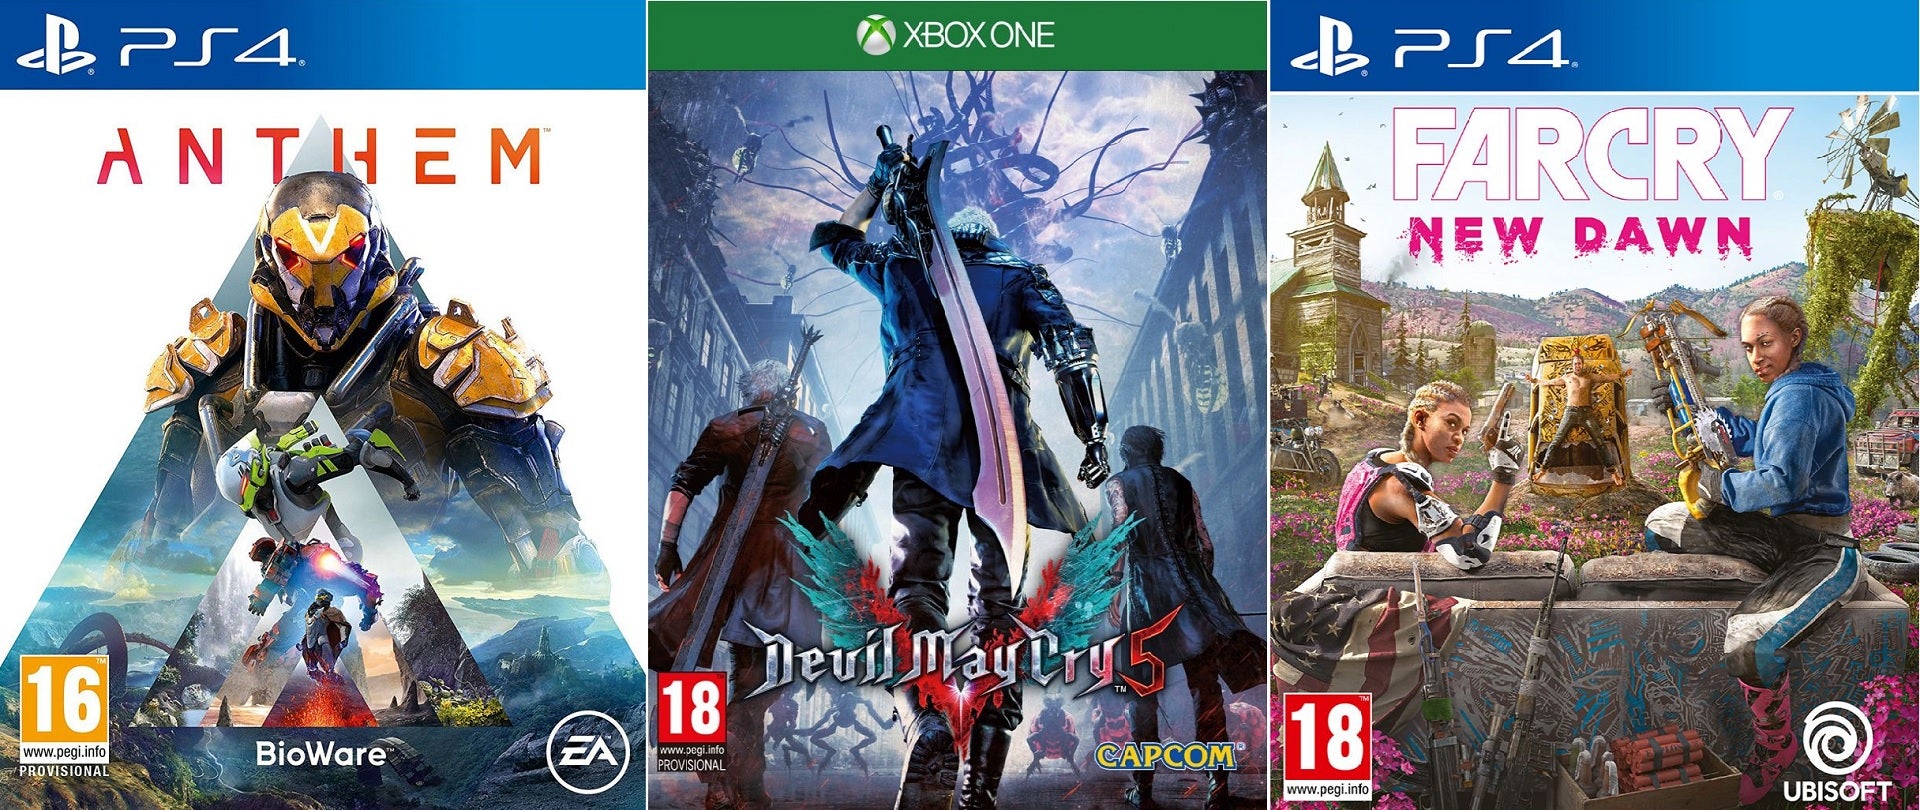 Image for Anthem, Devil May Cry 5, Crackdown 3, Metro: Exodus, Far Cry: New Dawn and more new releases are in Target's Buy 2 Get 1 Free sale